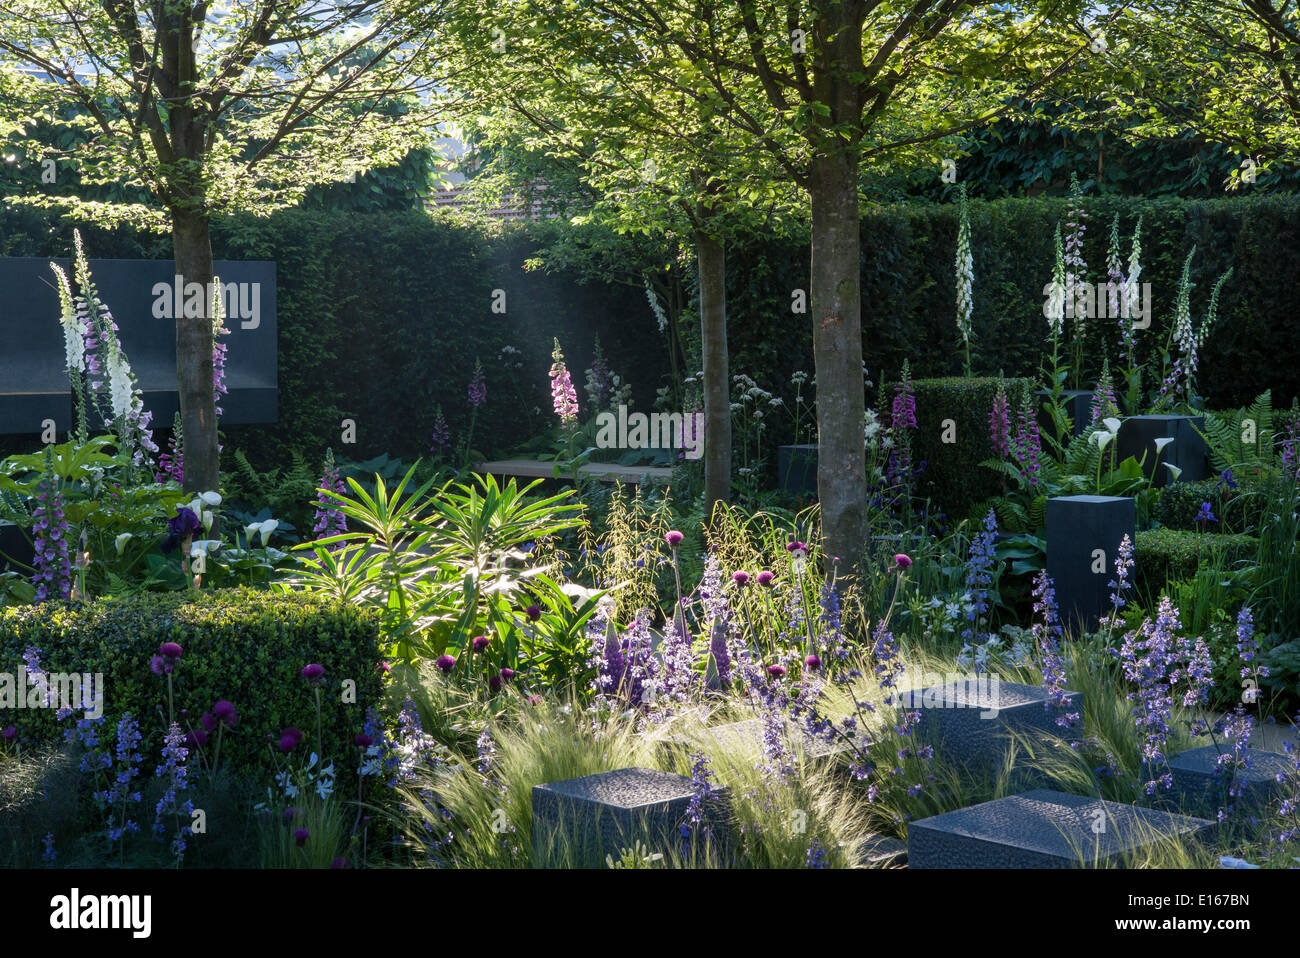 Peoples Choice Award at the Chelsea RHS Flower Show 2014 - Hope on the Horizon Garden - Designer Matt Keightley -   Sponsors - David Brownlow Charitable Foundation for Help for Heroes Silver Gilt Medal Stock Photo